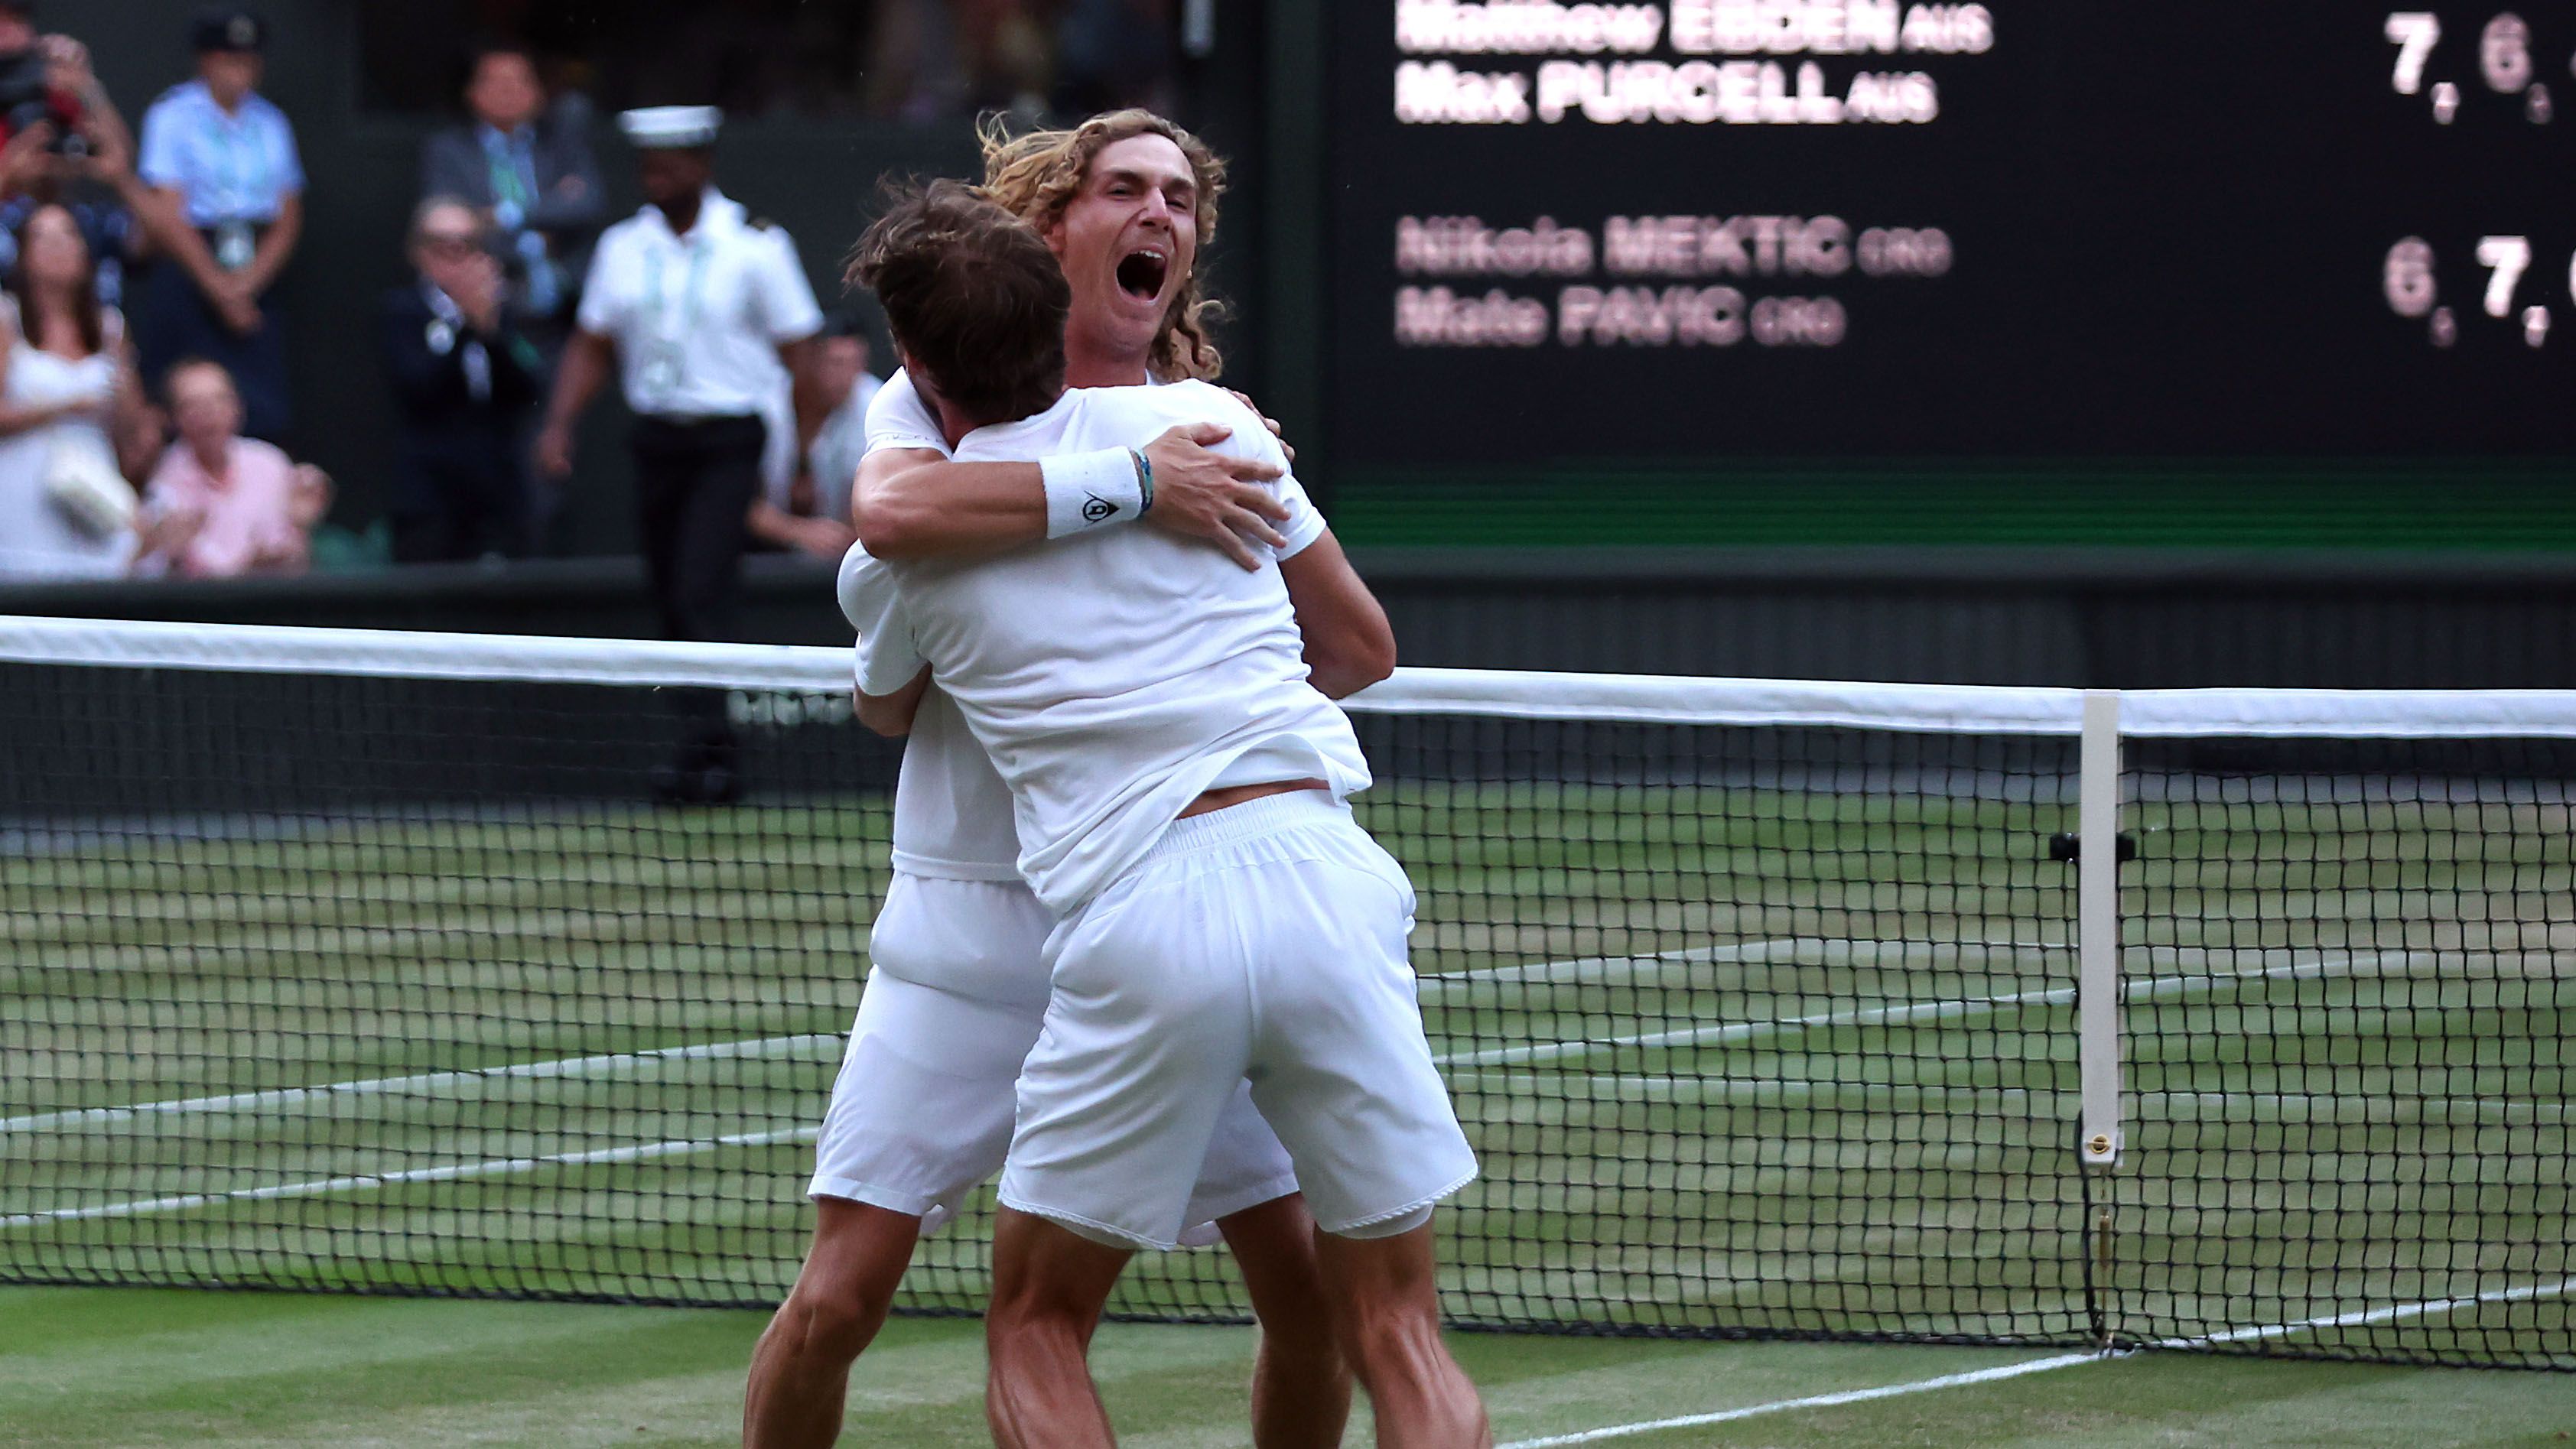 Matthew Ebden and Max Purcell of Australia celebrate after winning the Wimbledon men&#x27;s doubles